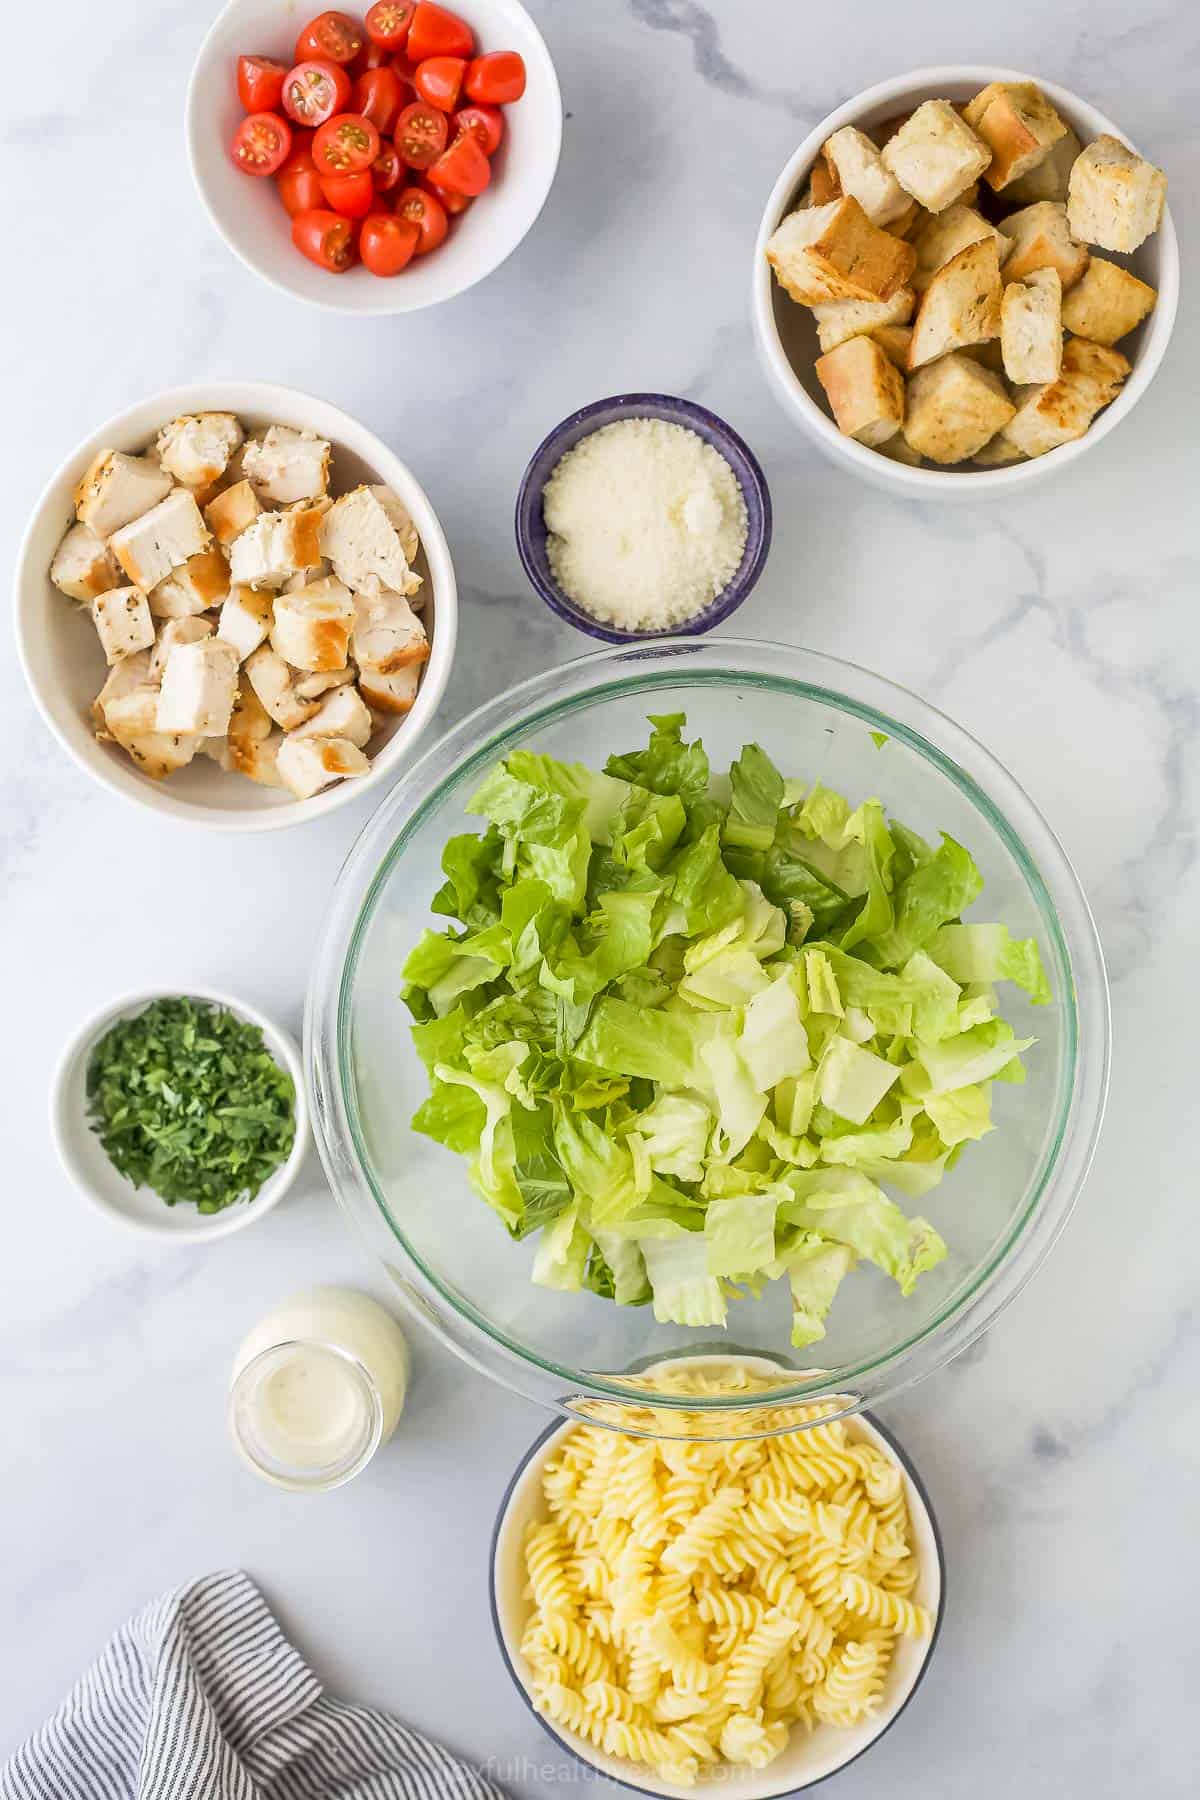 Romaine lettuce, grated parmesan cheese and the rest of the salad ingredients arranged on a marble surface